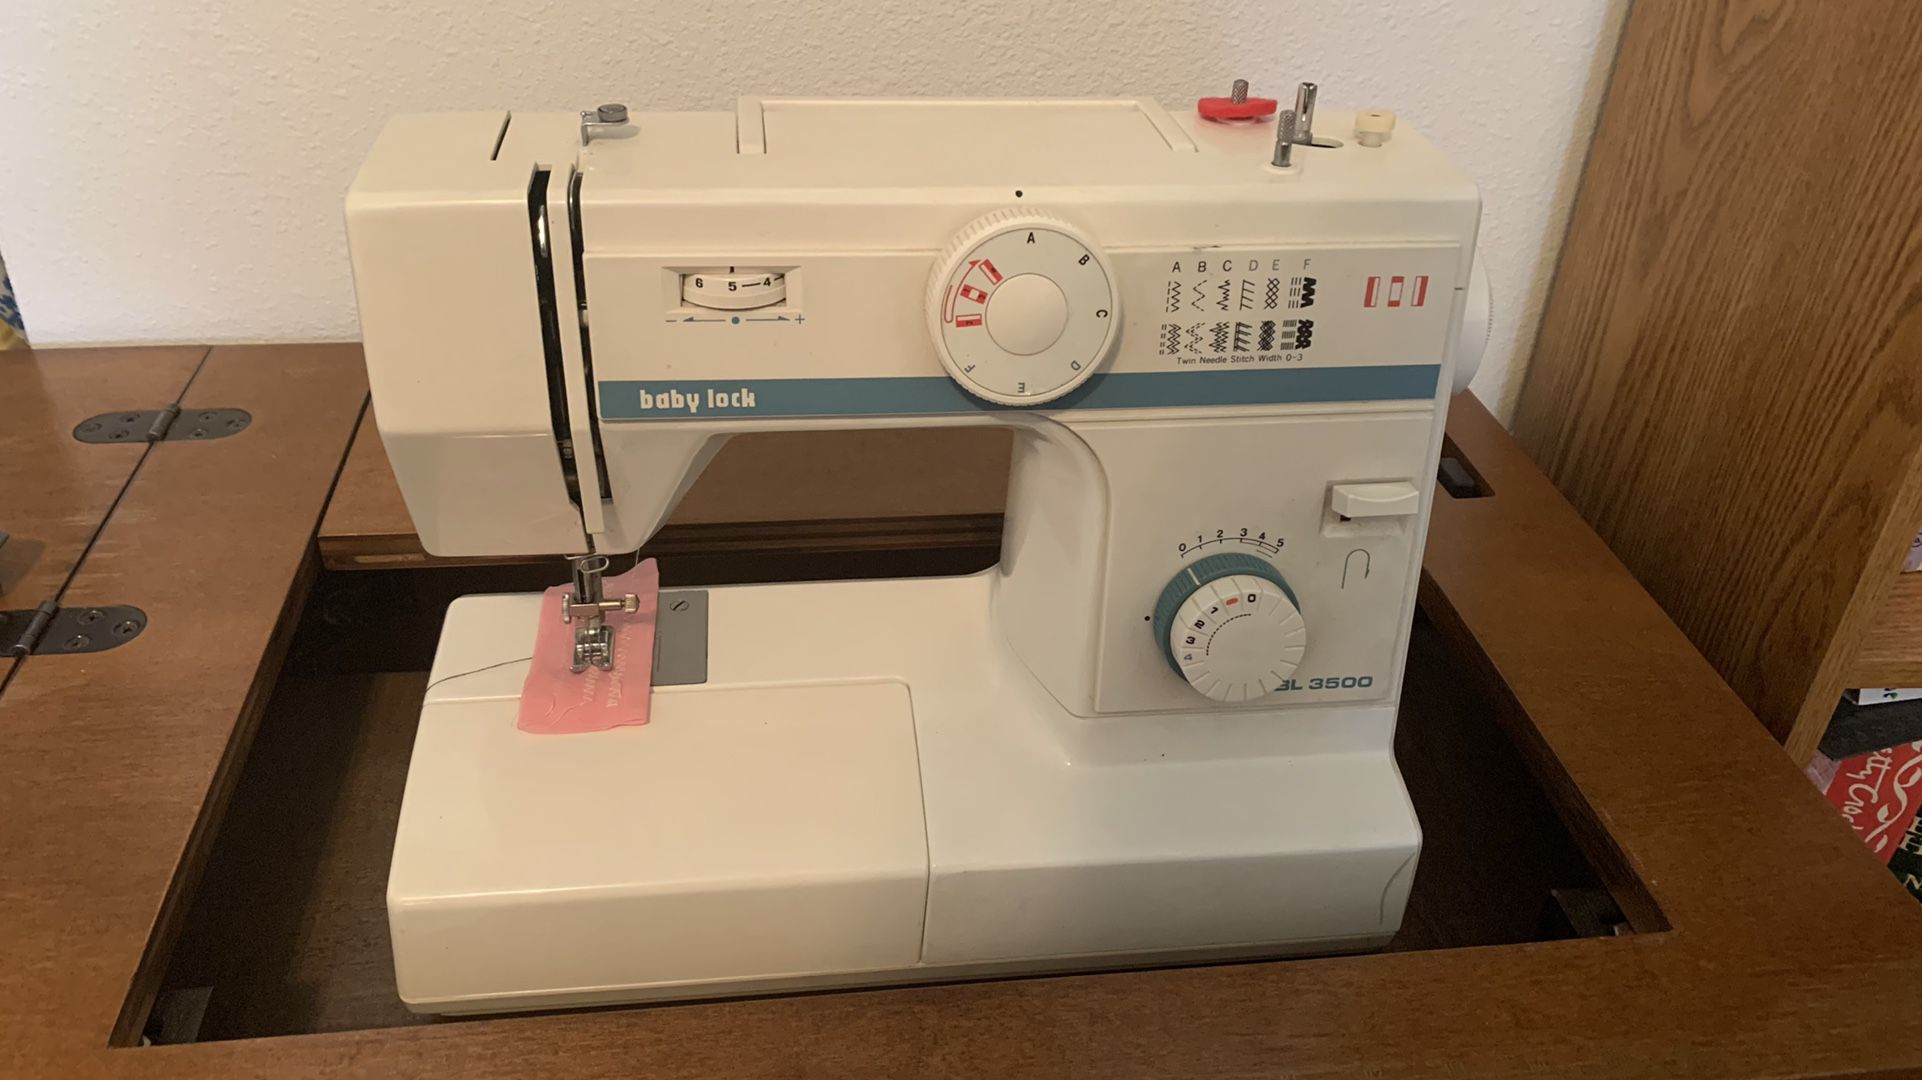 Baby Lock Sewing Machine in Foldout Cabinet